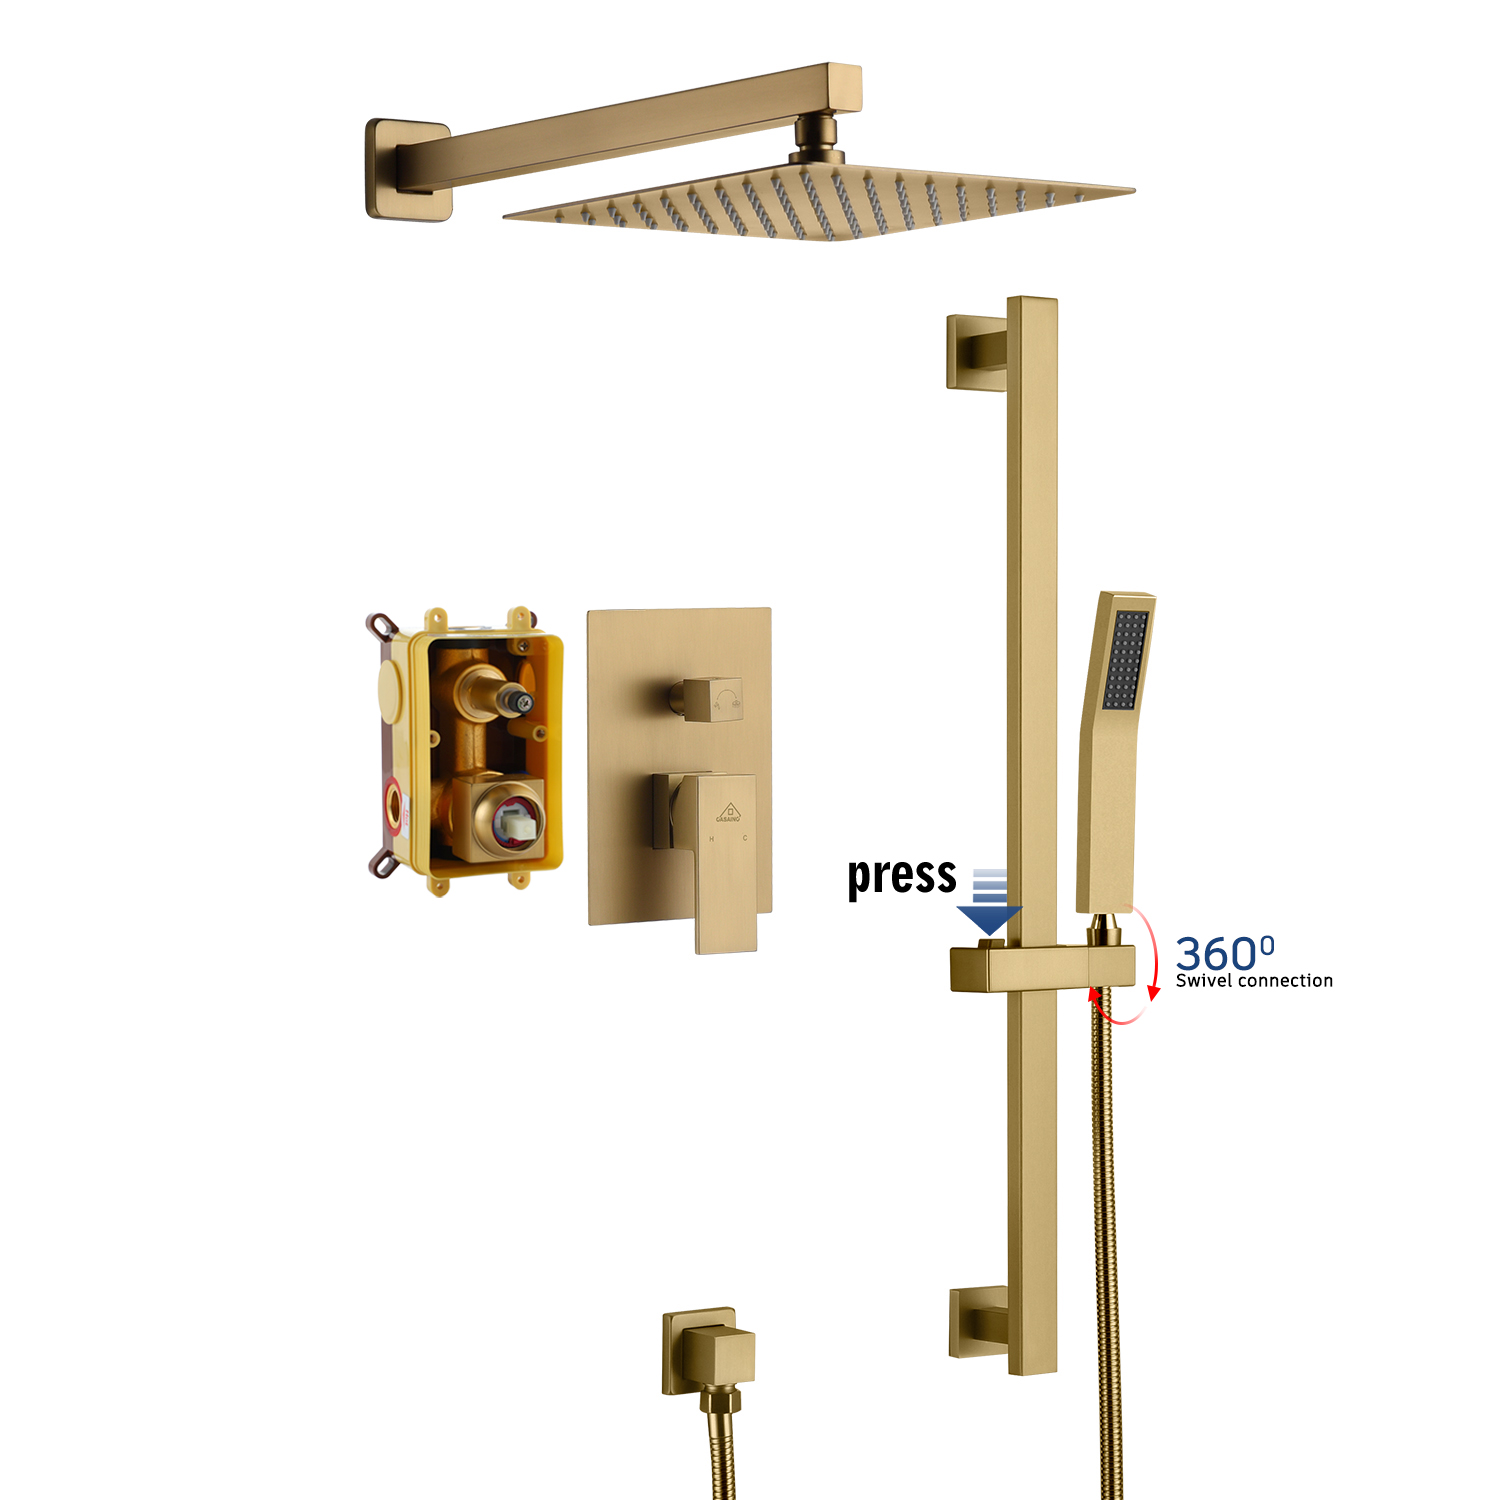 10-In Wall Mounted  Stainless Steel Dual Shower Heads Shower Systems With Hand Shower Slide Bar Included,brass tones